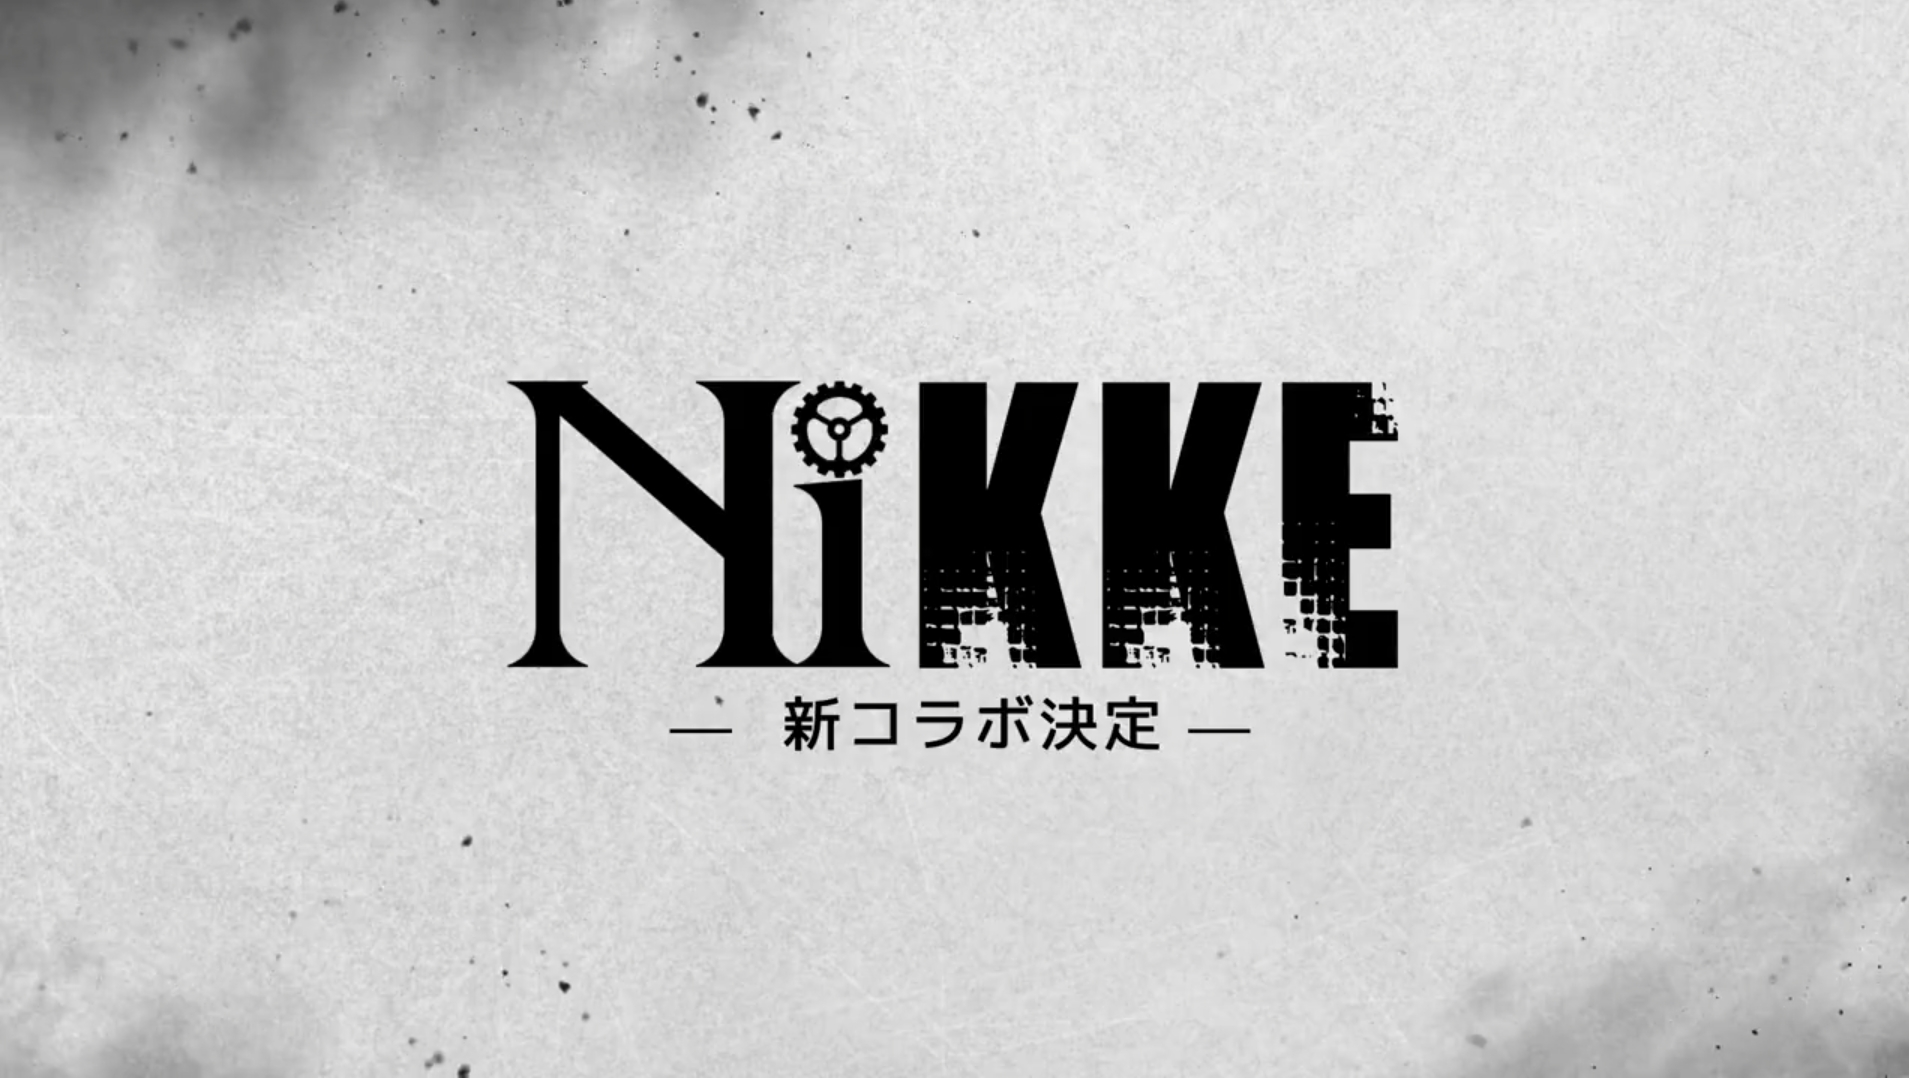 Goddess of Victory: Nikke PC Version Released & Chainsaw Man